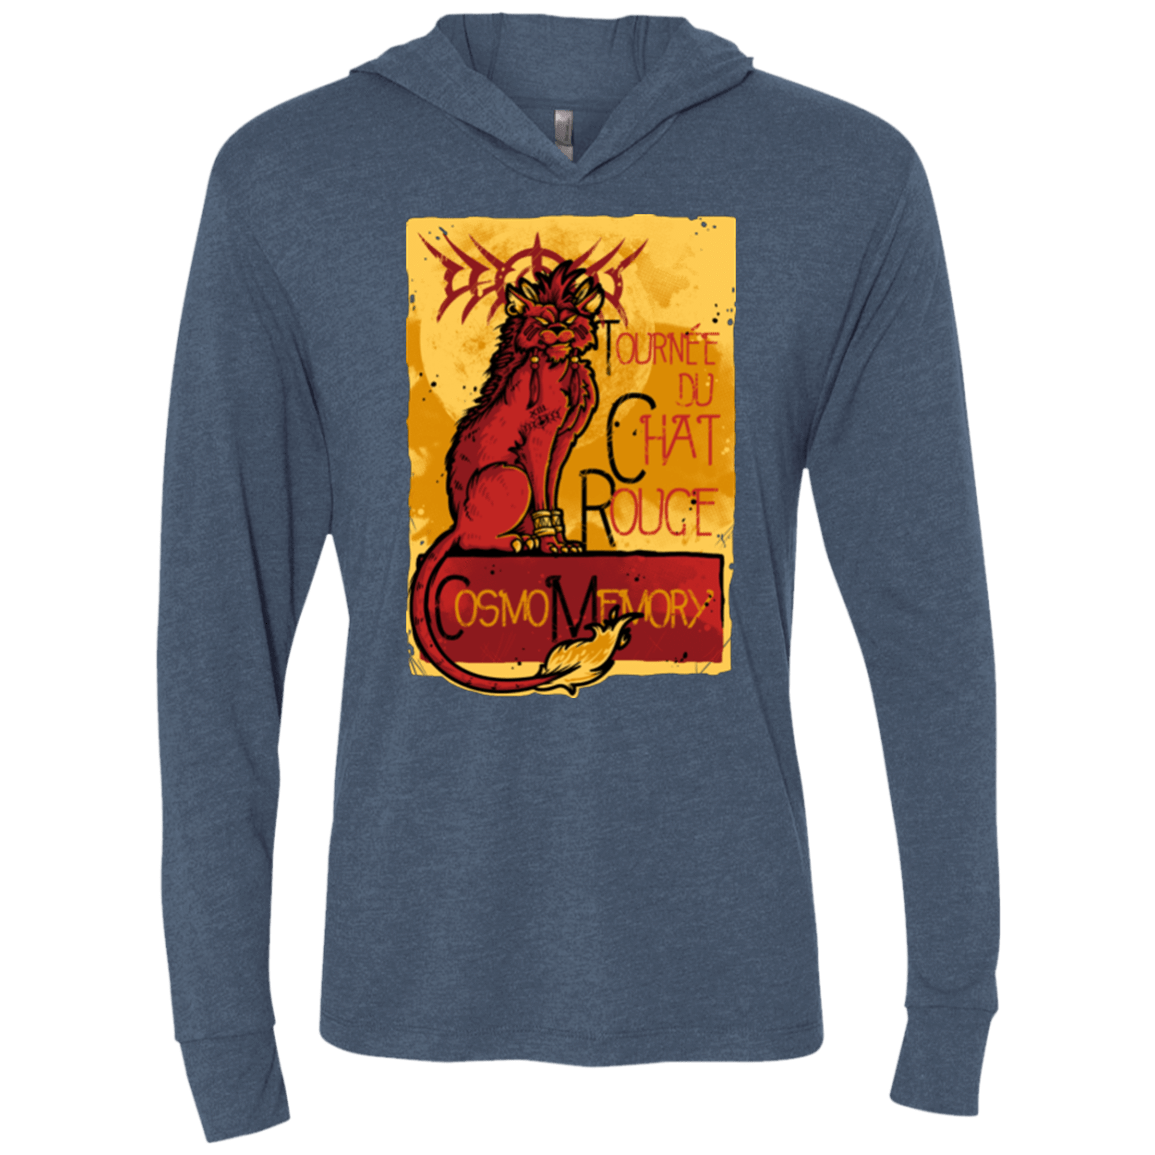 T-Shirts Indigo / X-Small LE CHAT ROUGE Triblend Long Sleeve Hoodie Tee